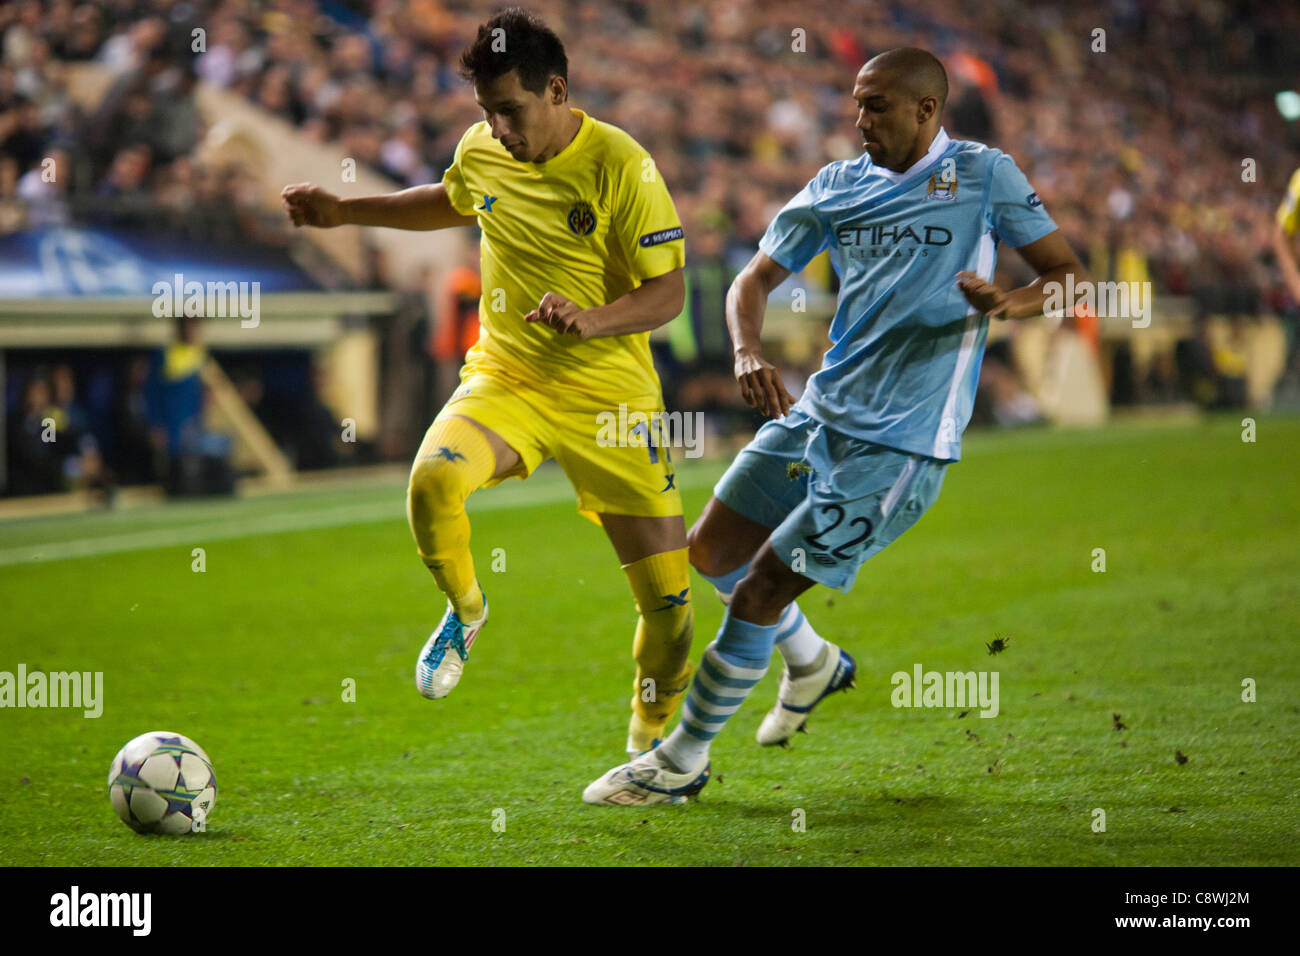 02/11/2011. Villareal, Spain Champions League - Villareal CF player Catalá and Manchester City player Clichy run for a ball Stock Photo